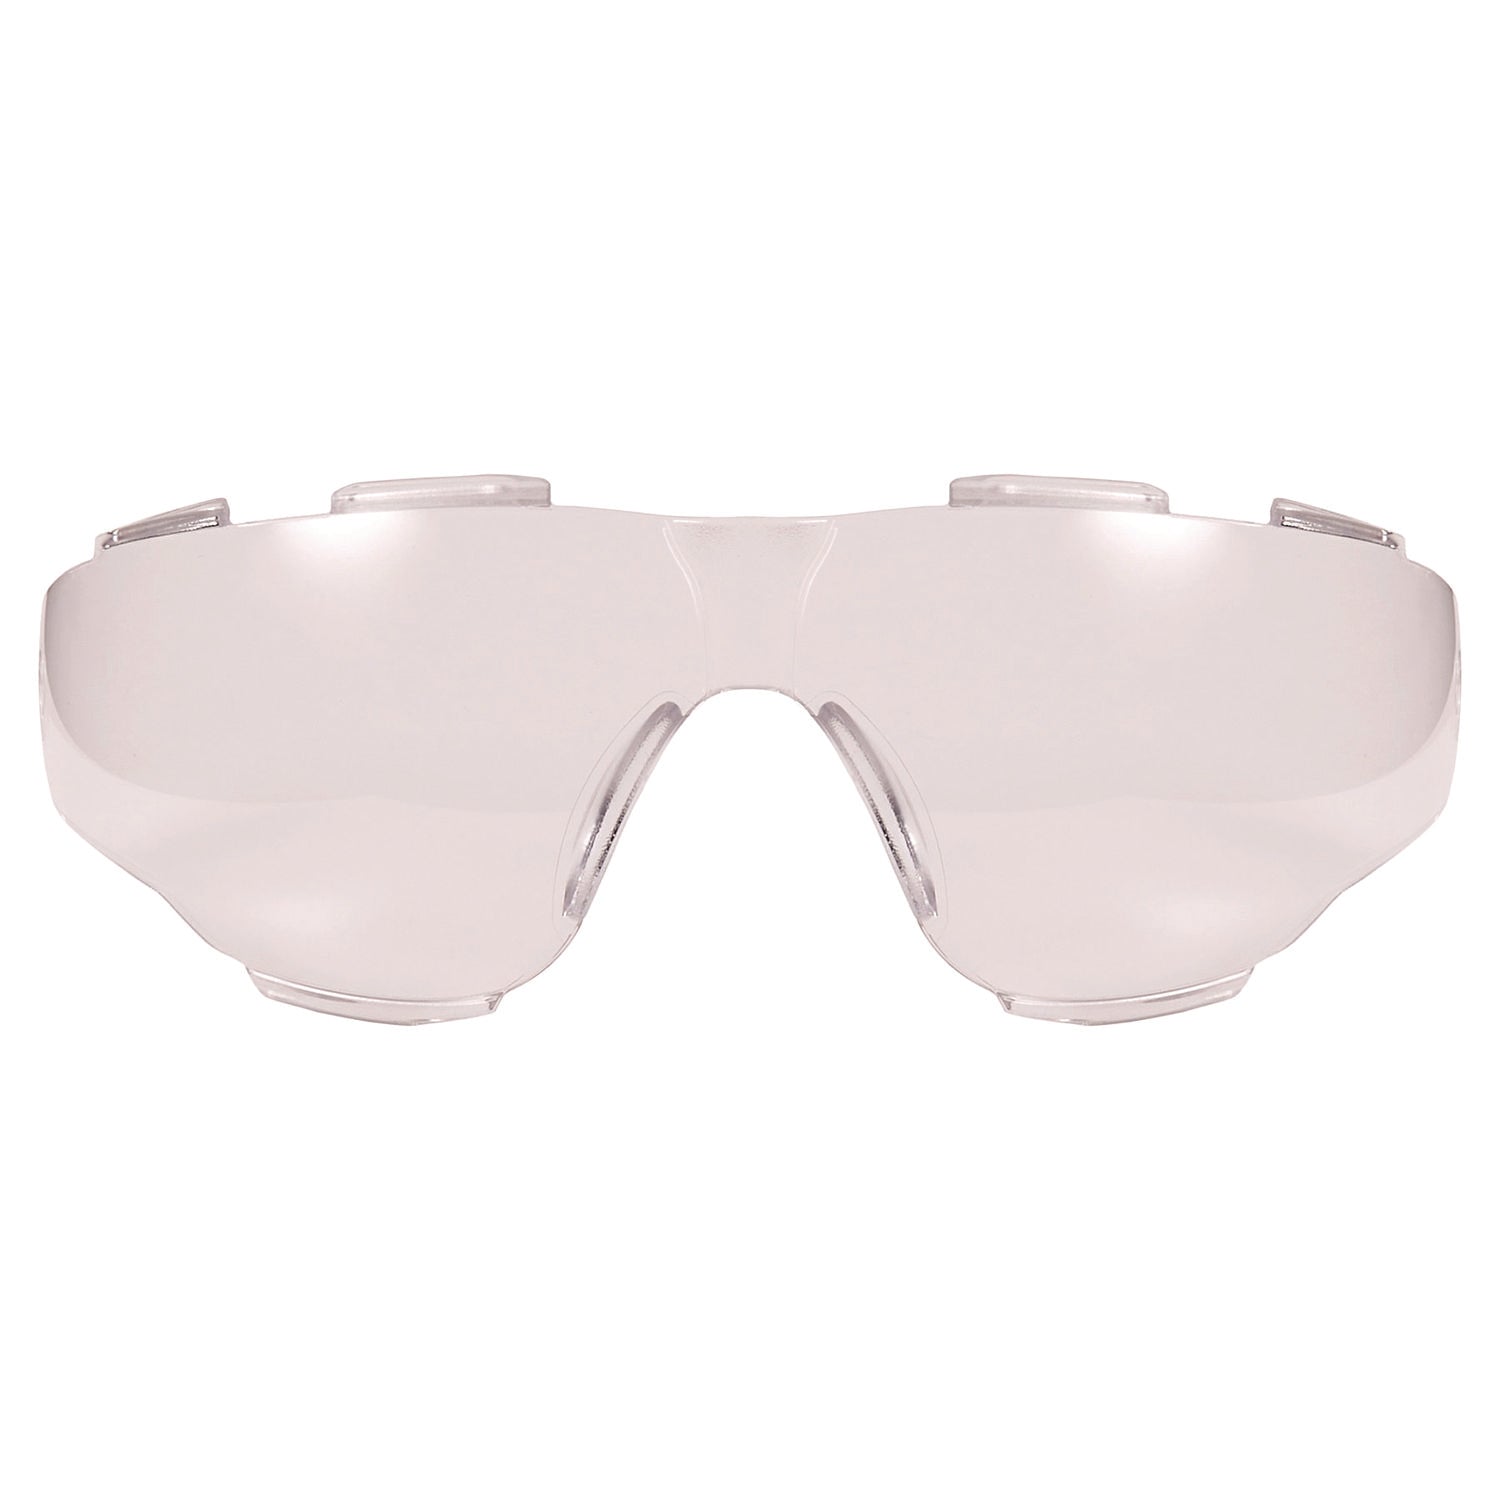 skullerz-arkyn-anti-scratch-and-enhanced-anti-fog-safety-goggles-replacement-lens-clear-ships-in-1-3-business-days_ego60306 - 1